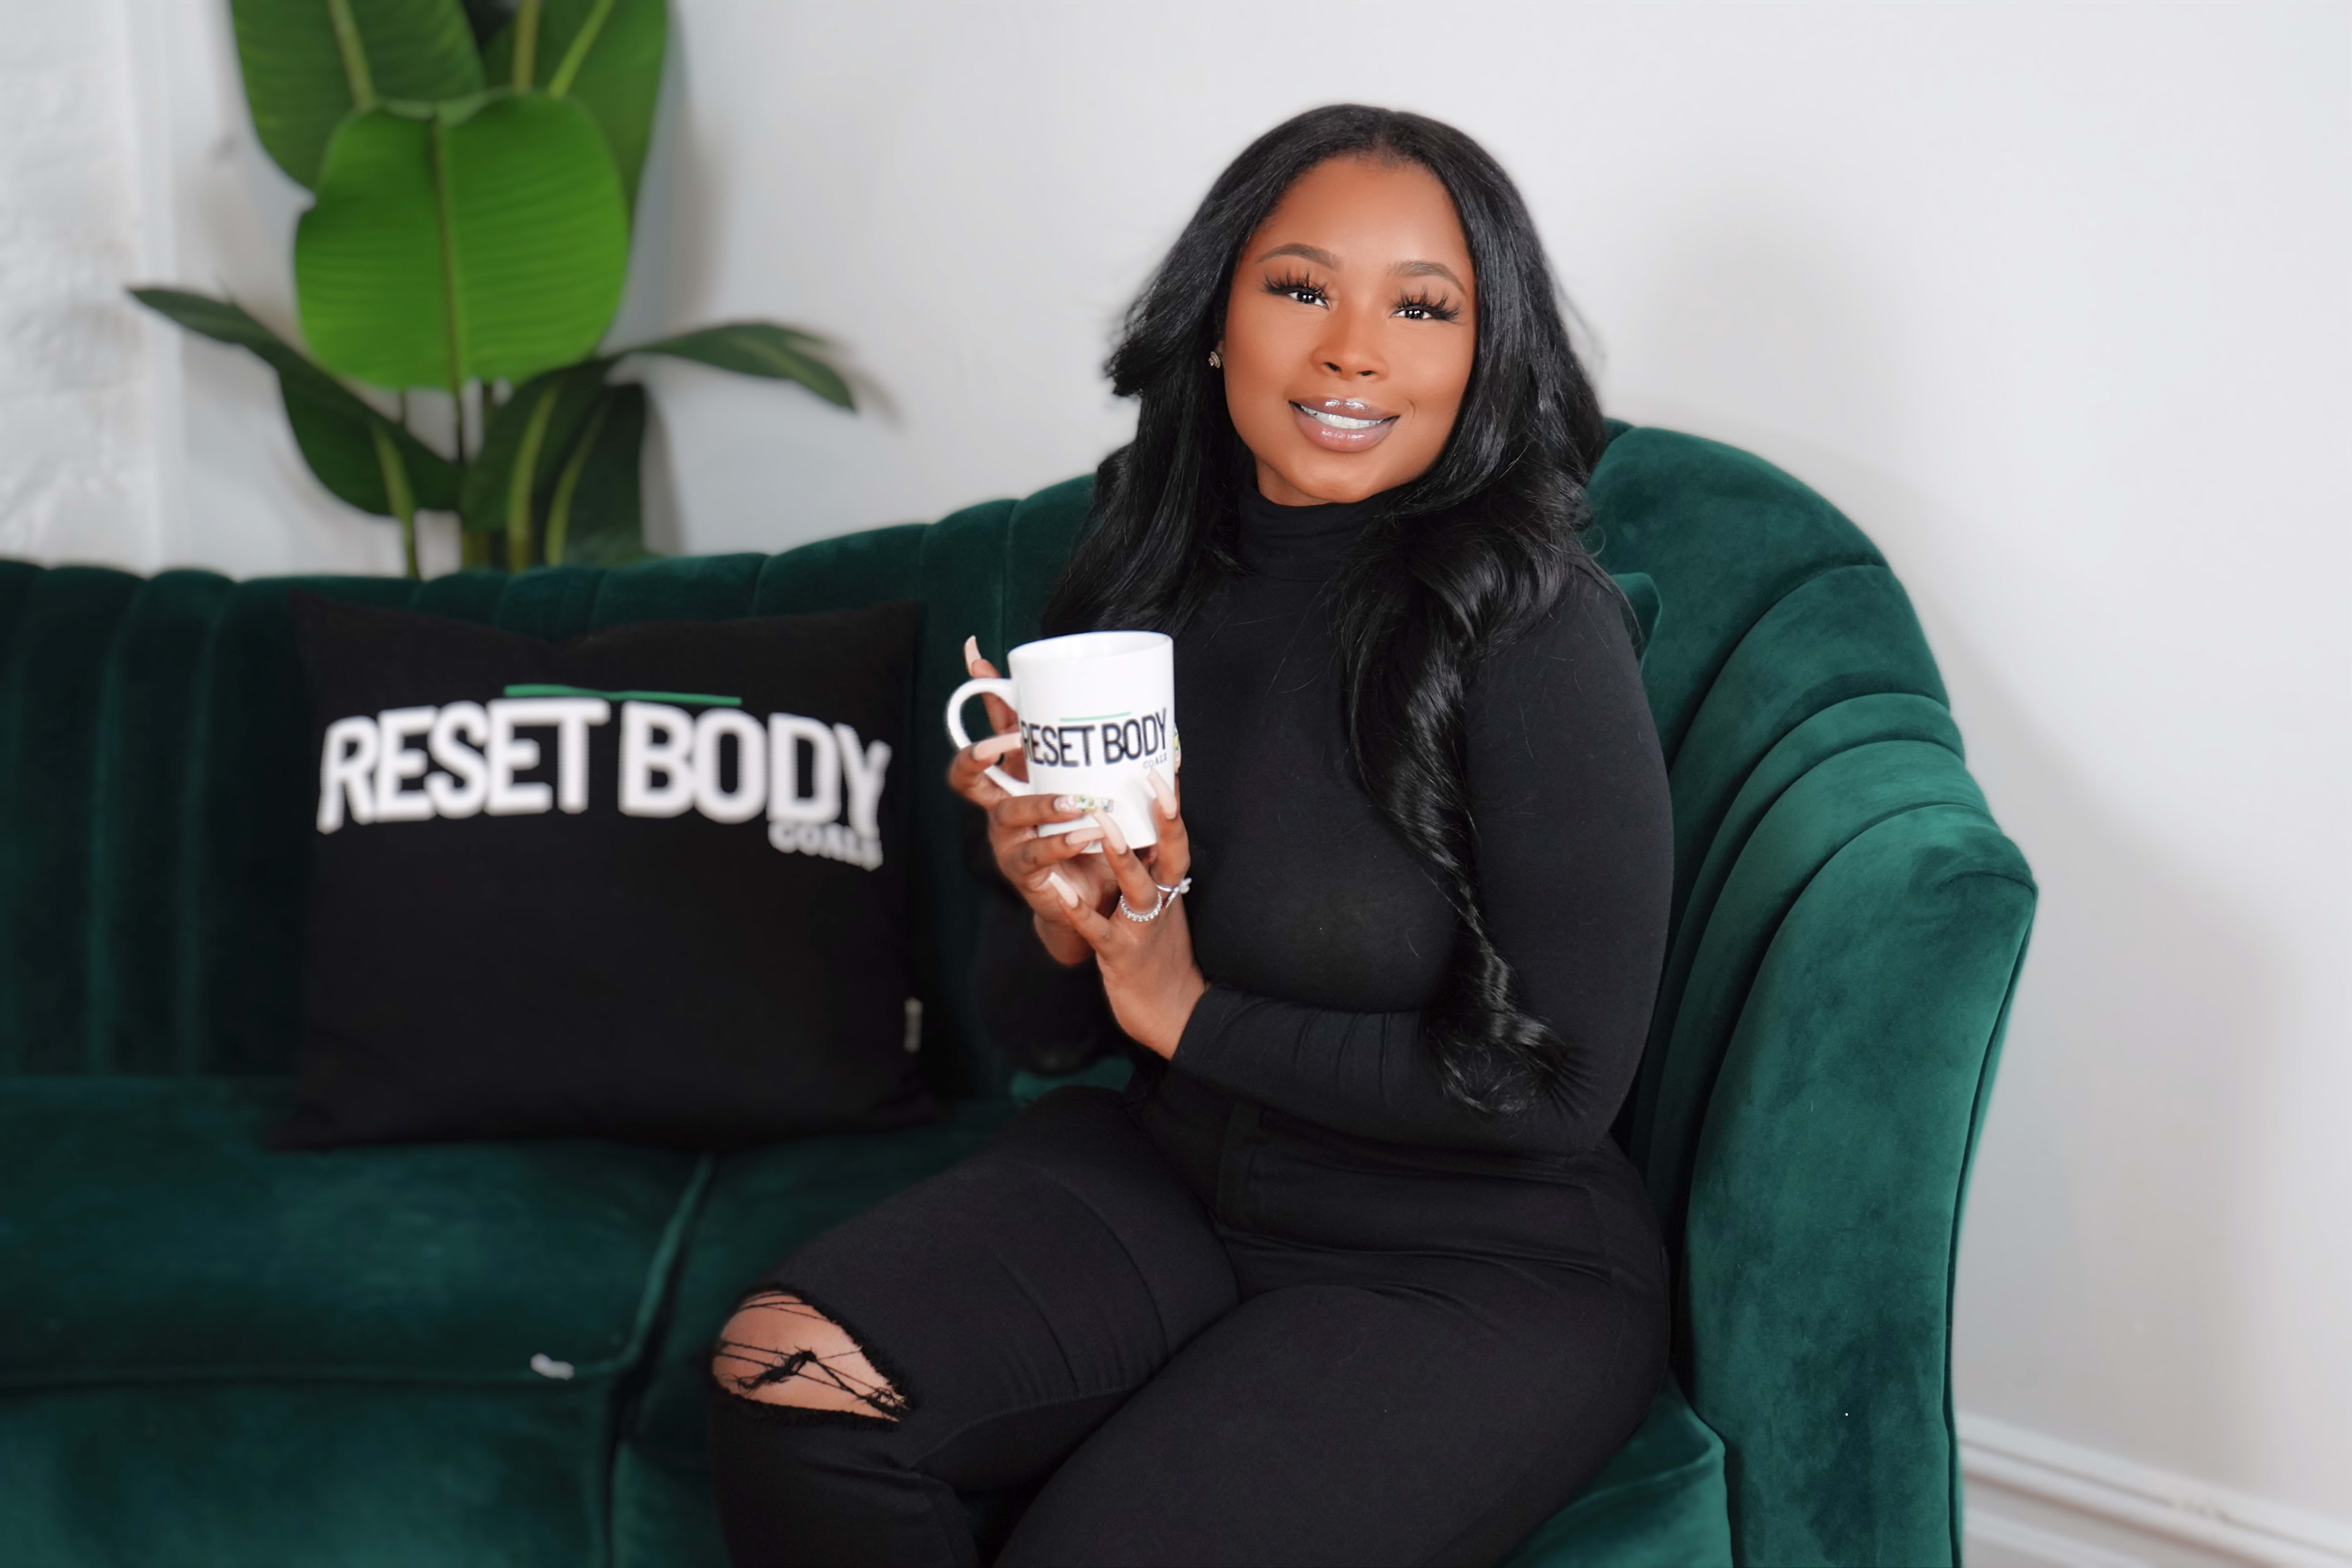 A woman sitting on a green couch holding a black coffee mug.